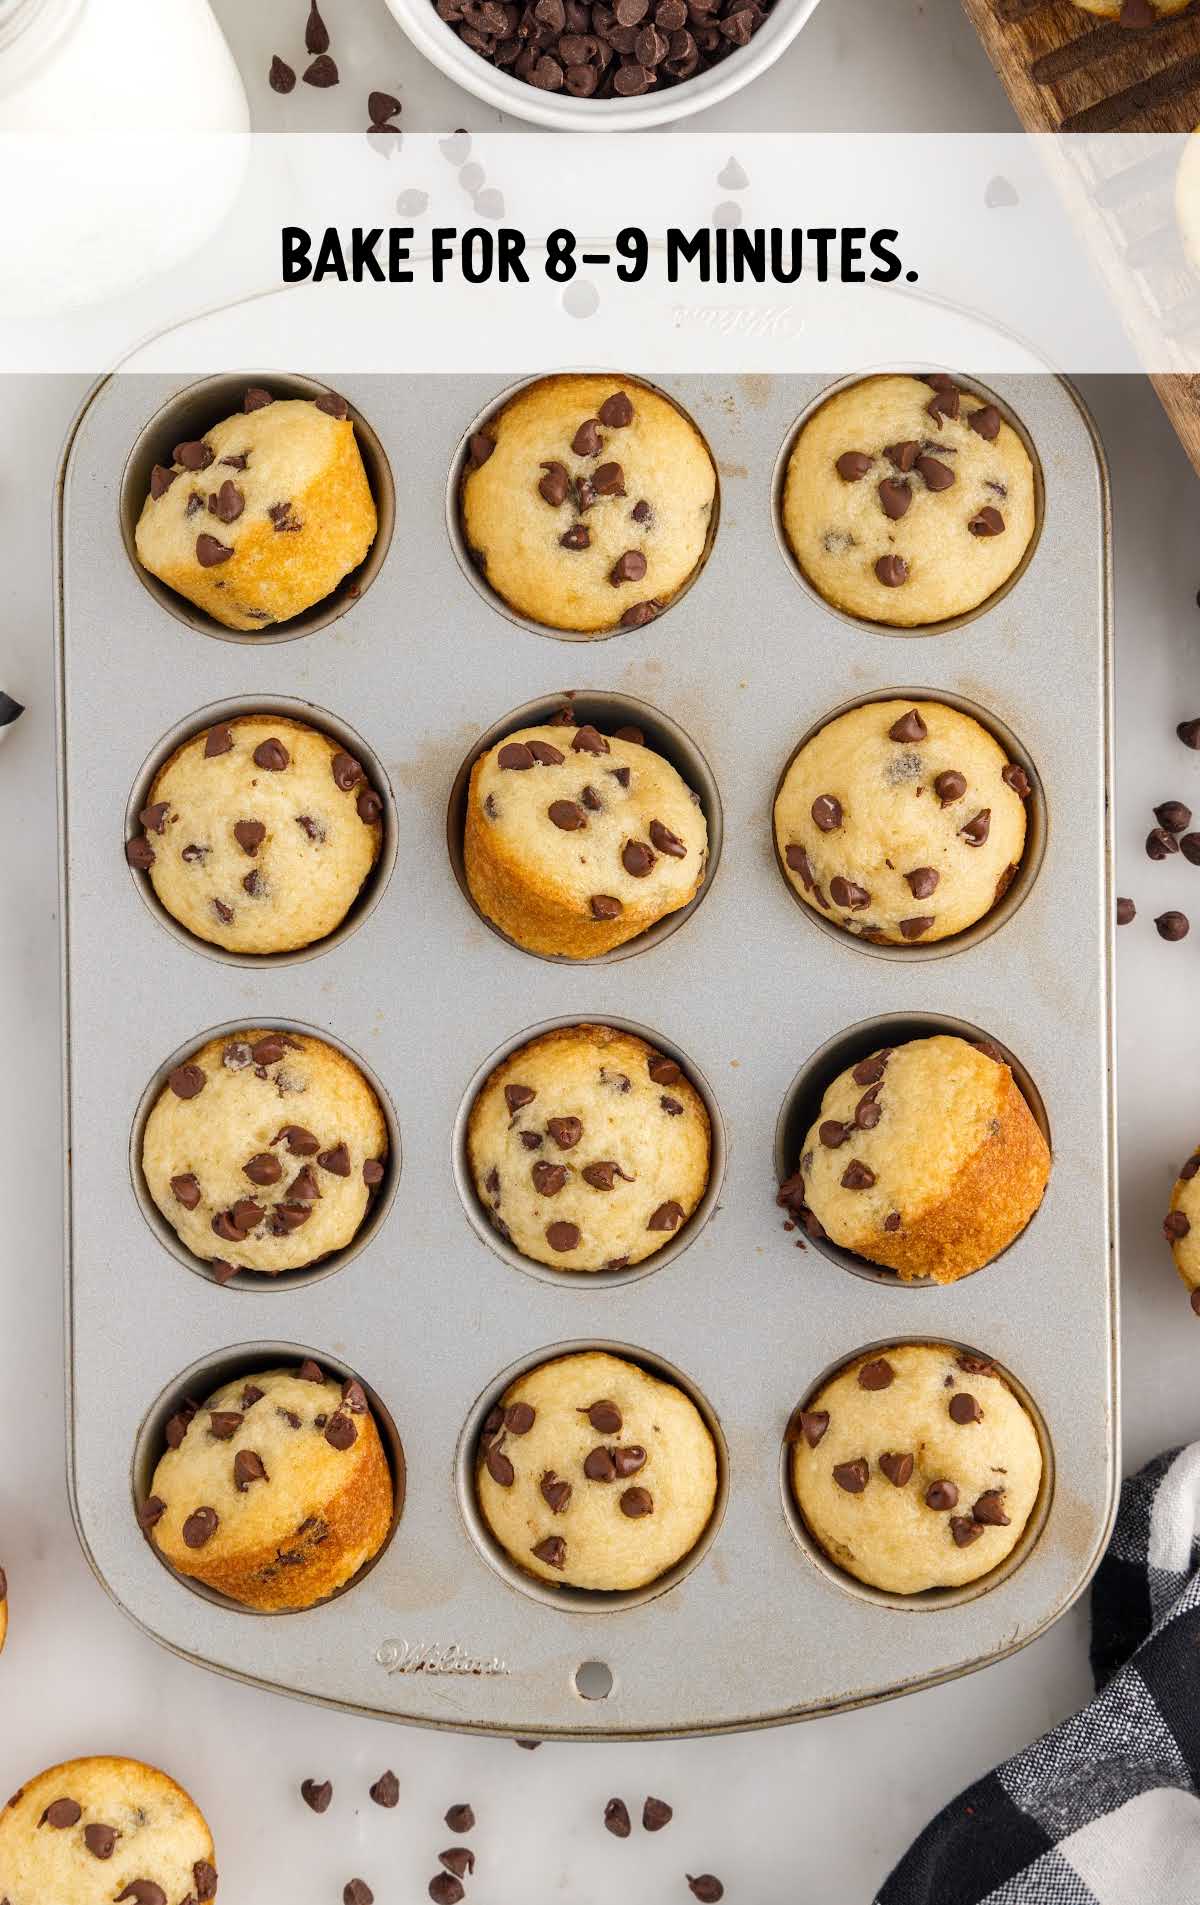 bake muffins for 8 minutes